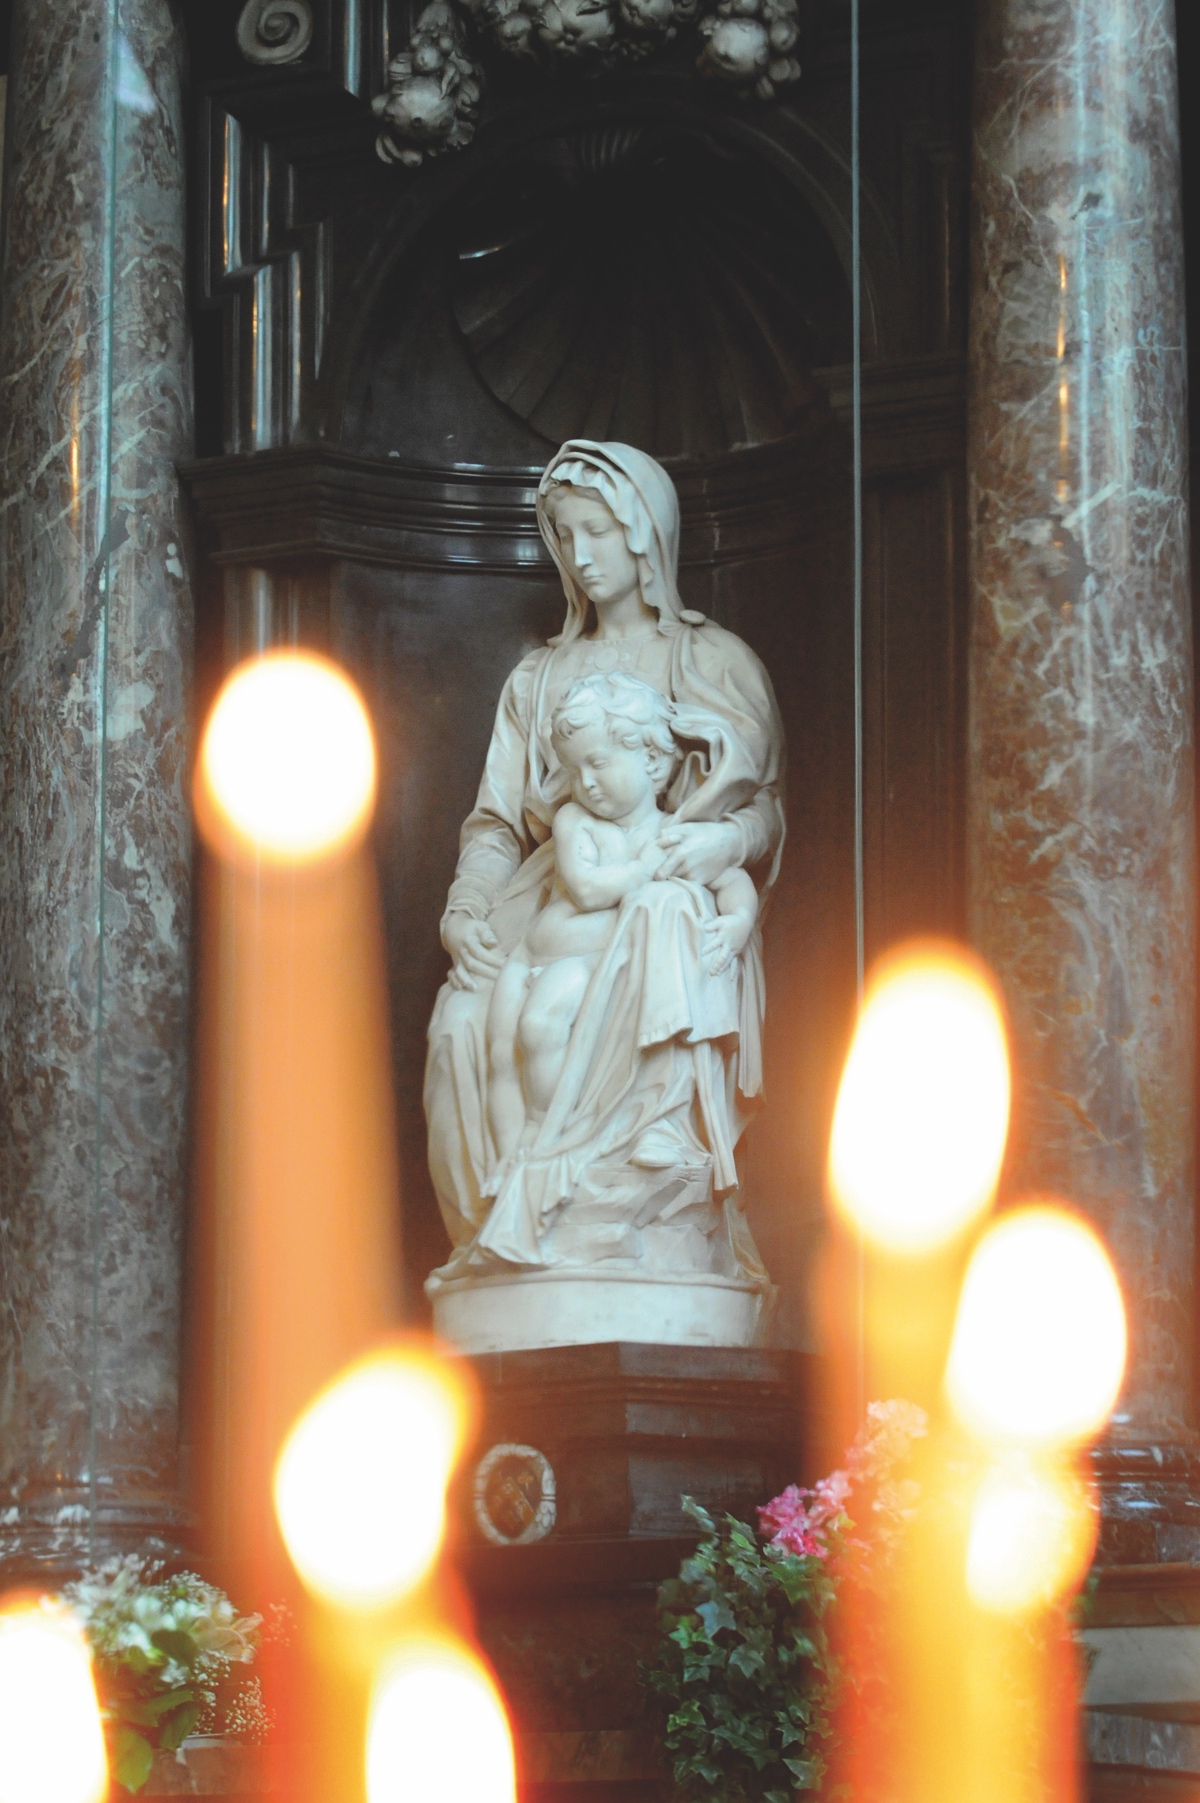 Michelangelo’s Madonna and Child, made of Carrara marble